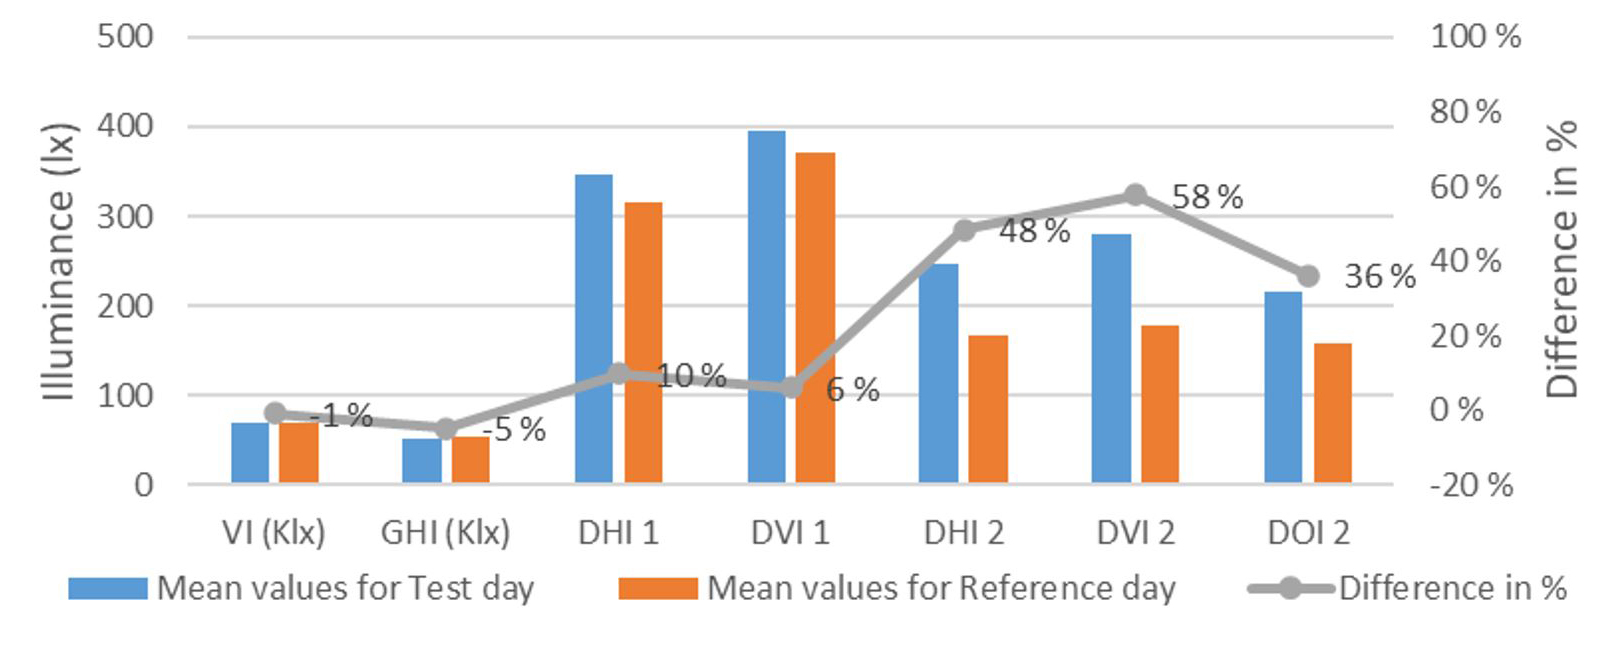 Comparison of Mean Illuminance values for the test and reference pair days, recorded between 12:00am and 14:30pm. VI and GHI are shown in Klx.